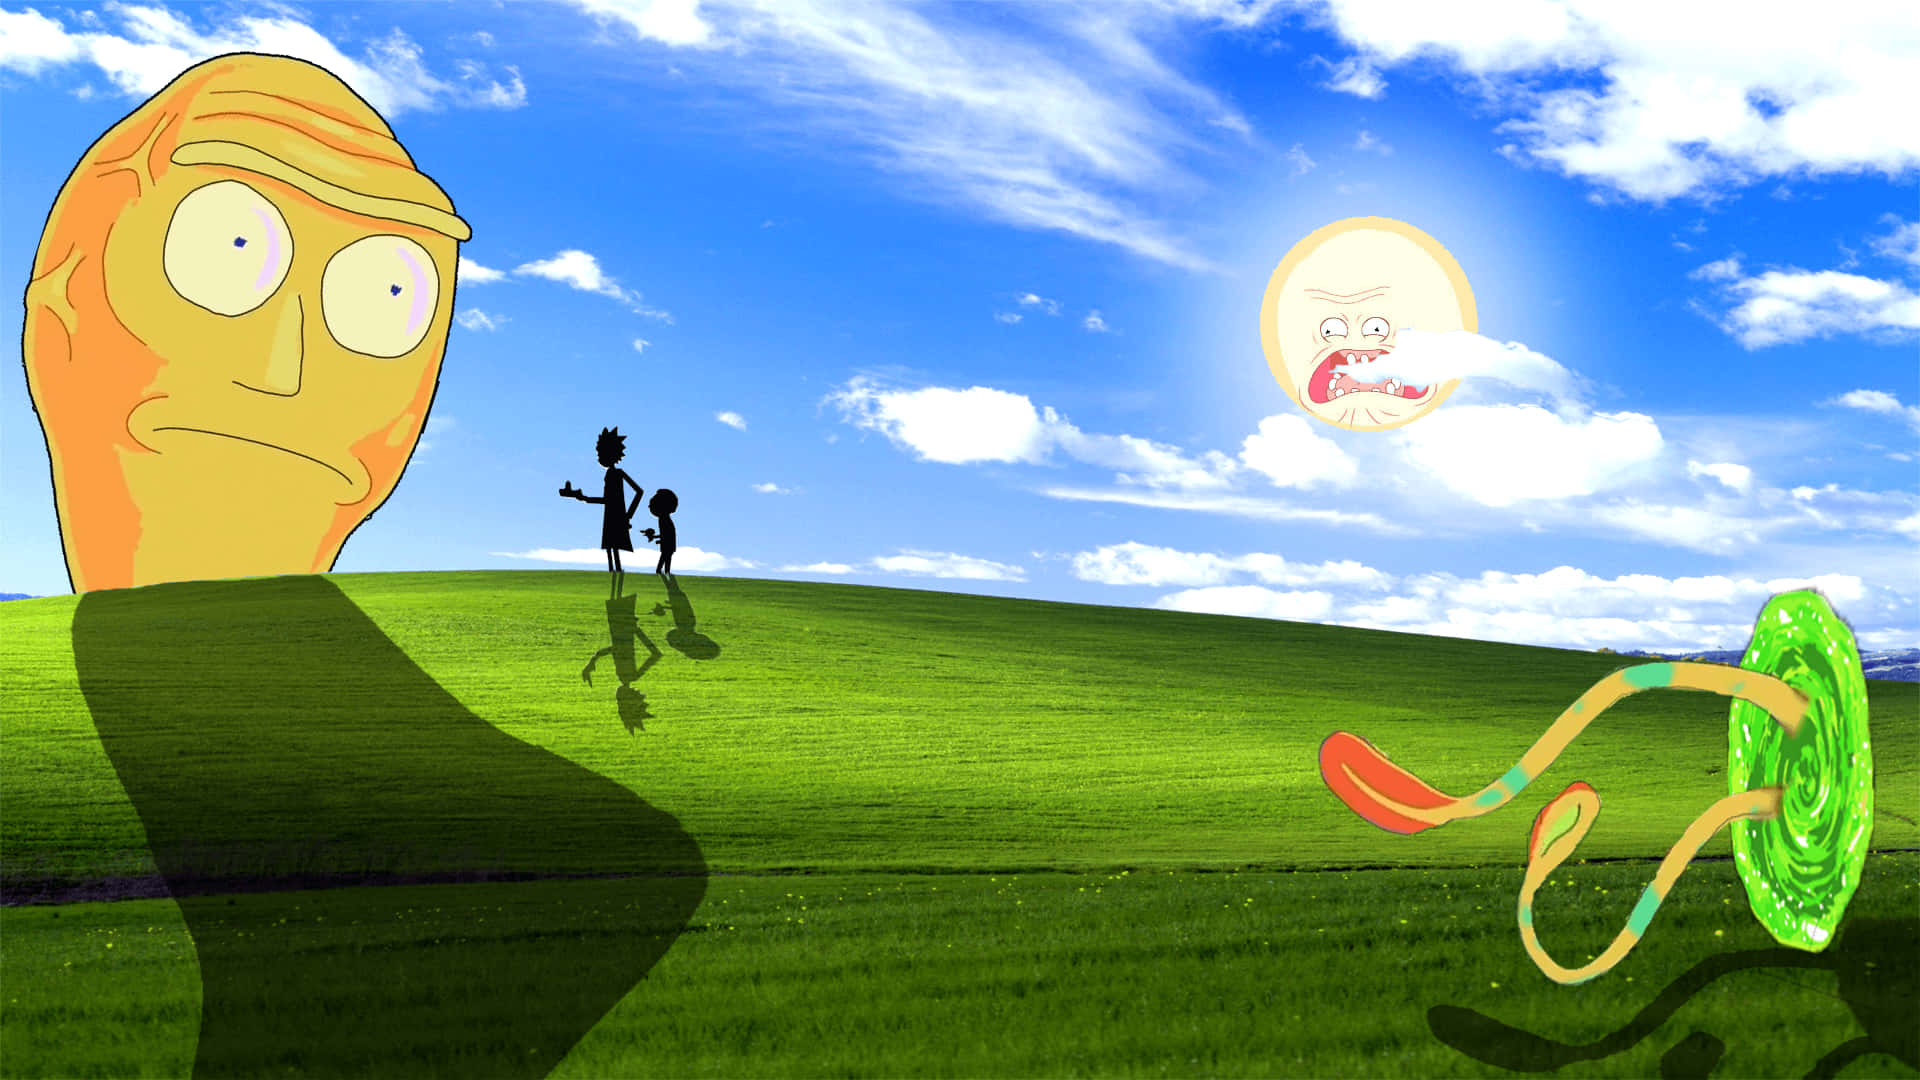 Enjoy this Windows XP background filled with mesmerizing 3-D color bursts